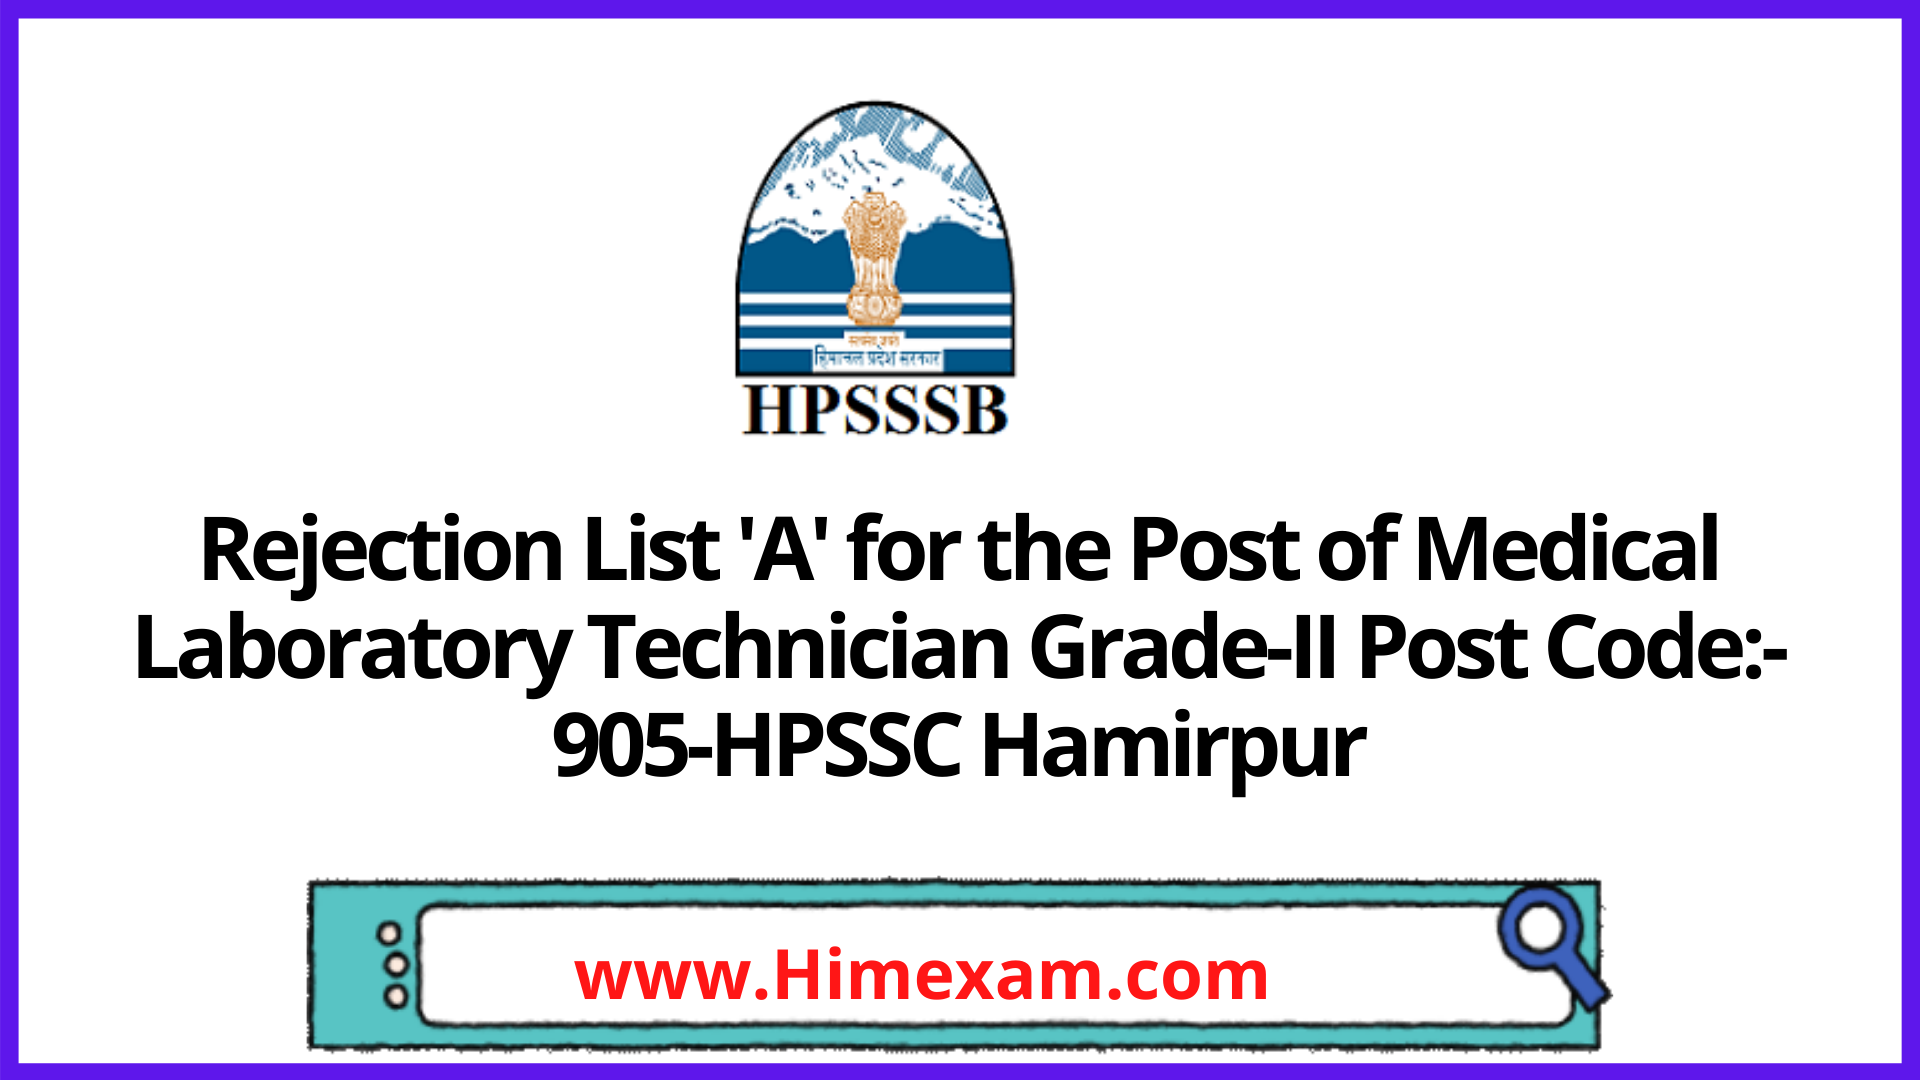 Rejection List 'A' for the Post of Medical Laboratory Technician Grade-II Post Code:- 905-HPSSC Hamirpur